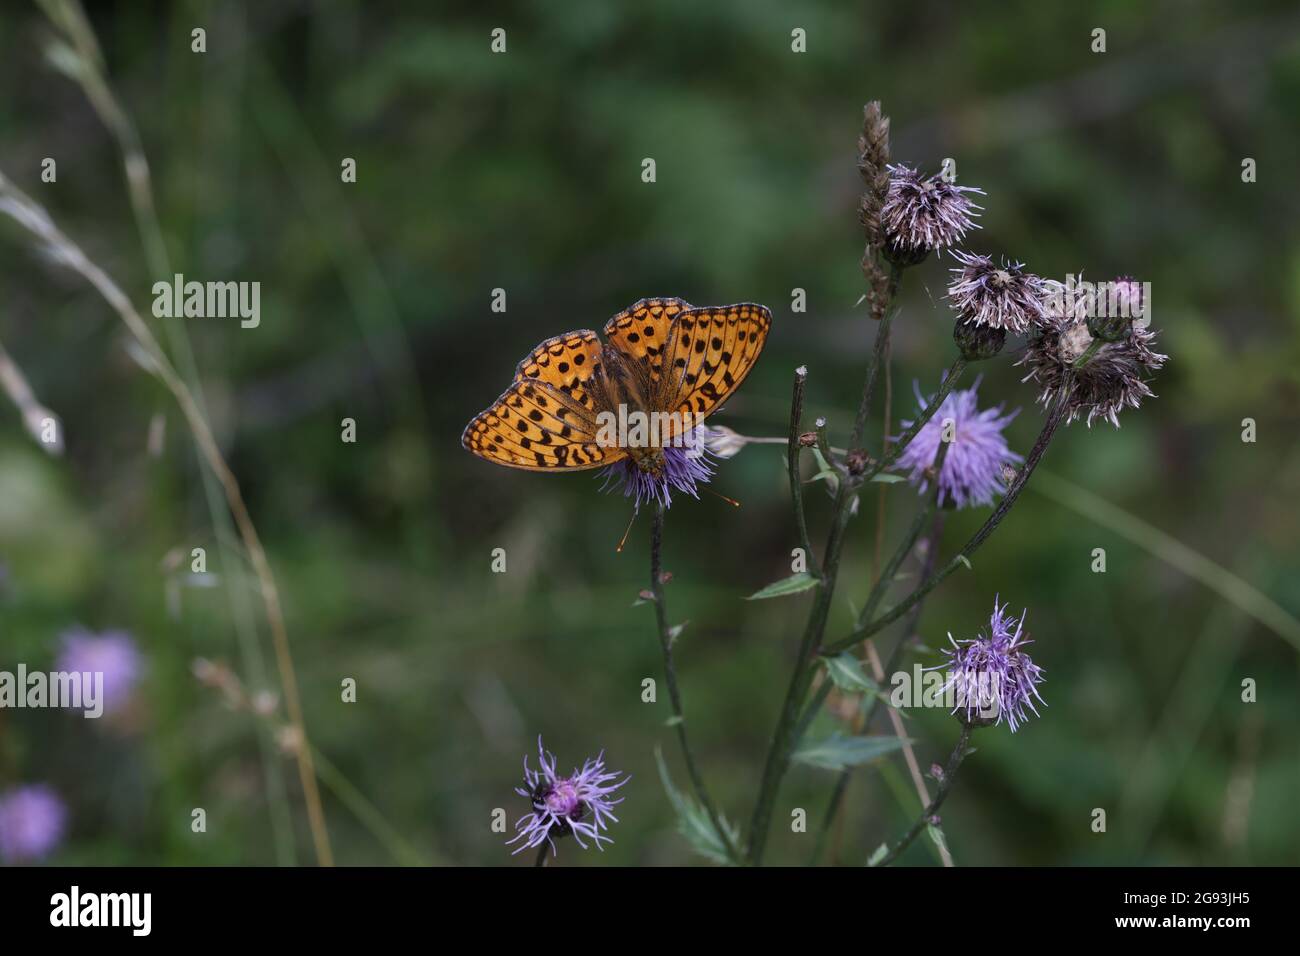 Beautiful close-up of a silver-washed fritillary butterfly sitting on a flower. Stock Photo